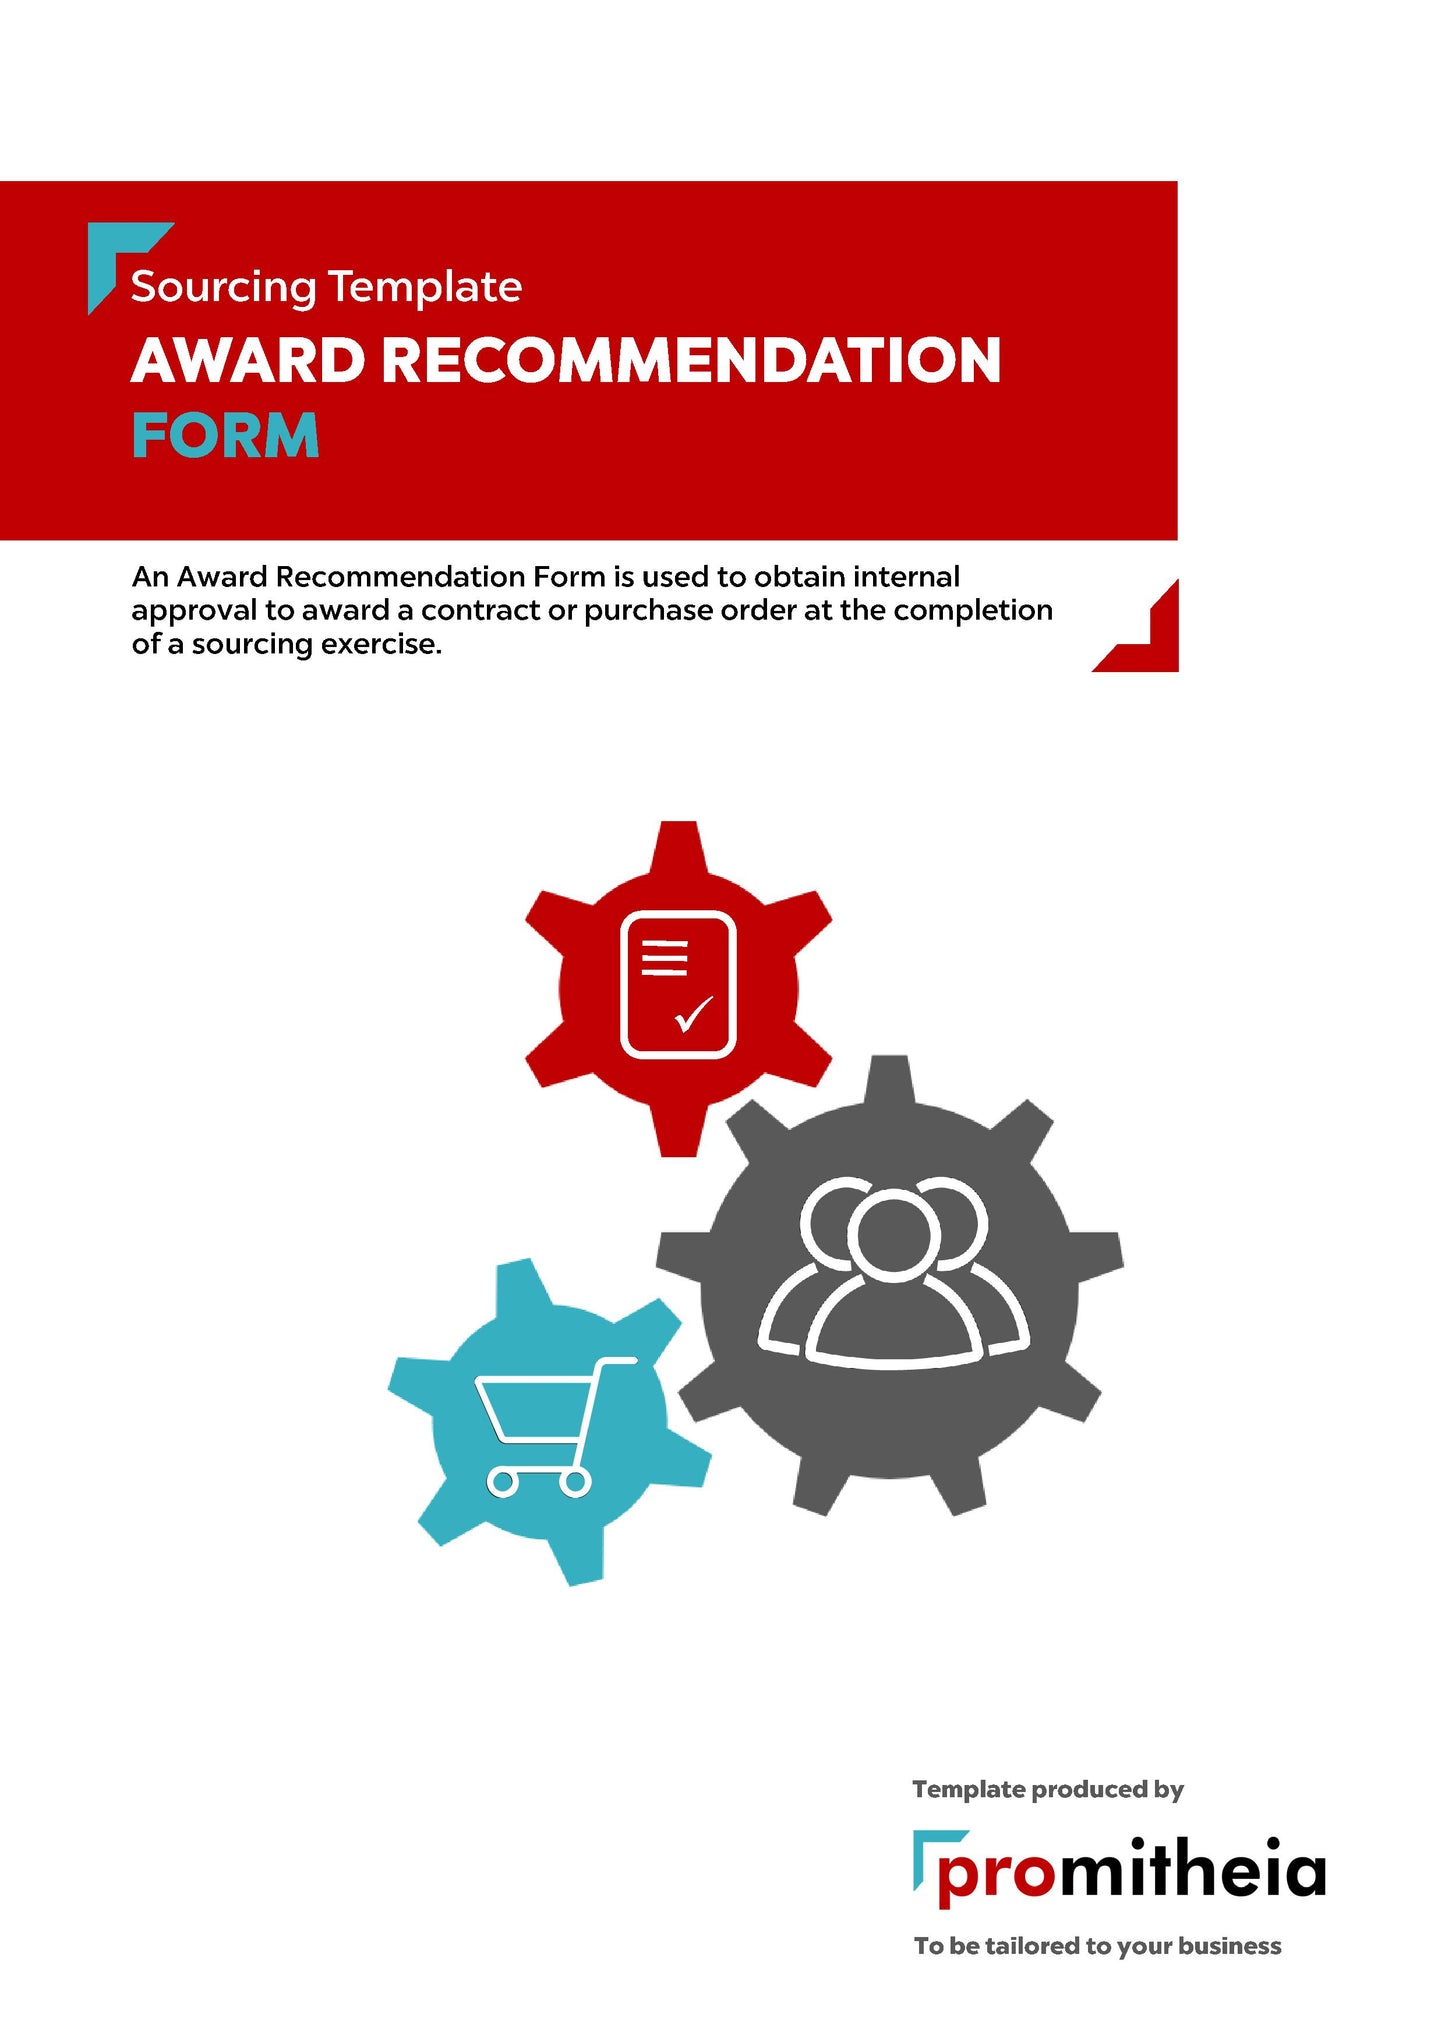 Award Recommendation Form